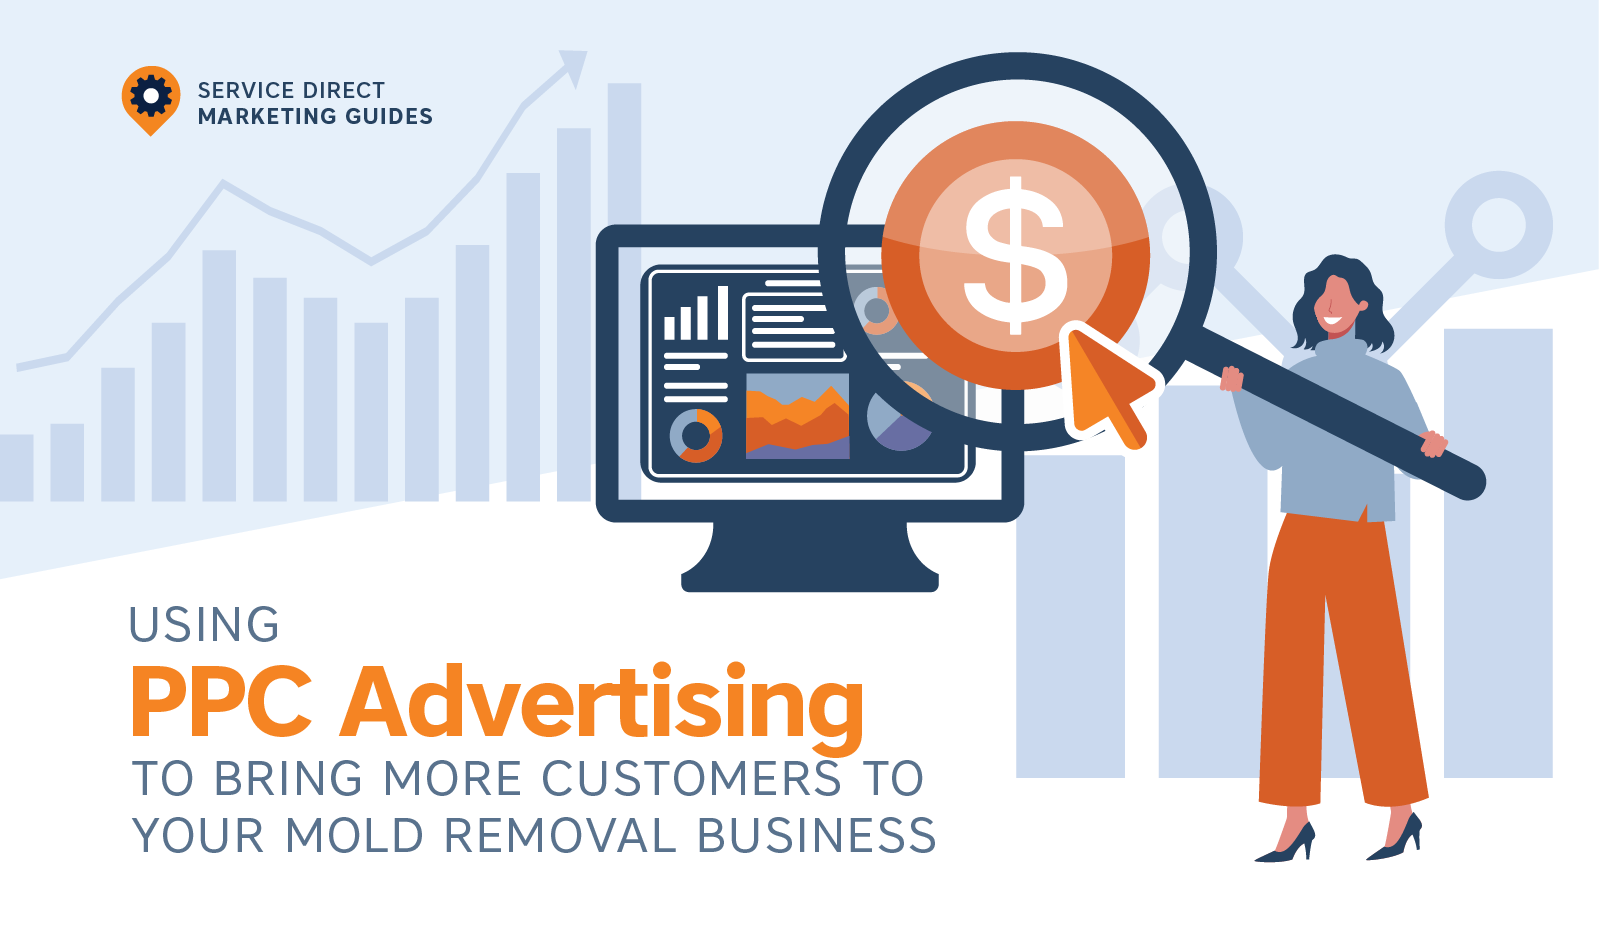 Using PPC Advertising to Bring More Customers to Your Mold Removal Business